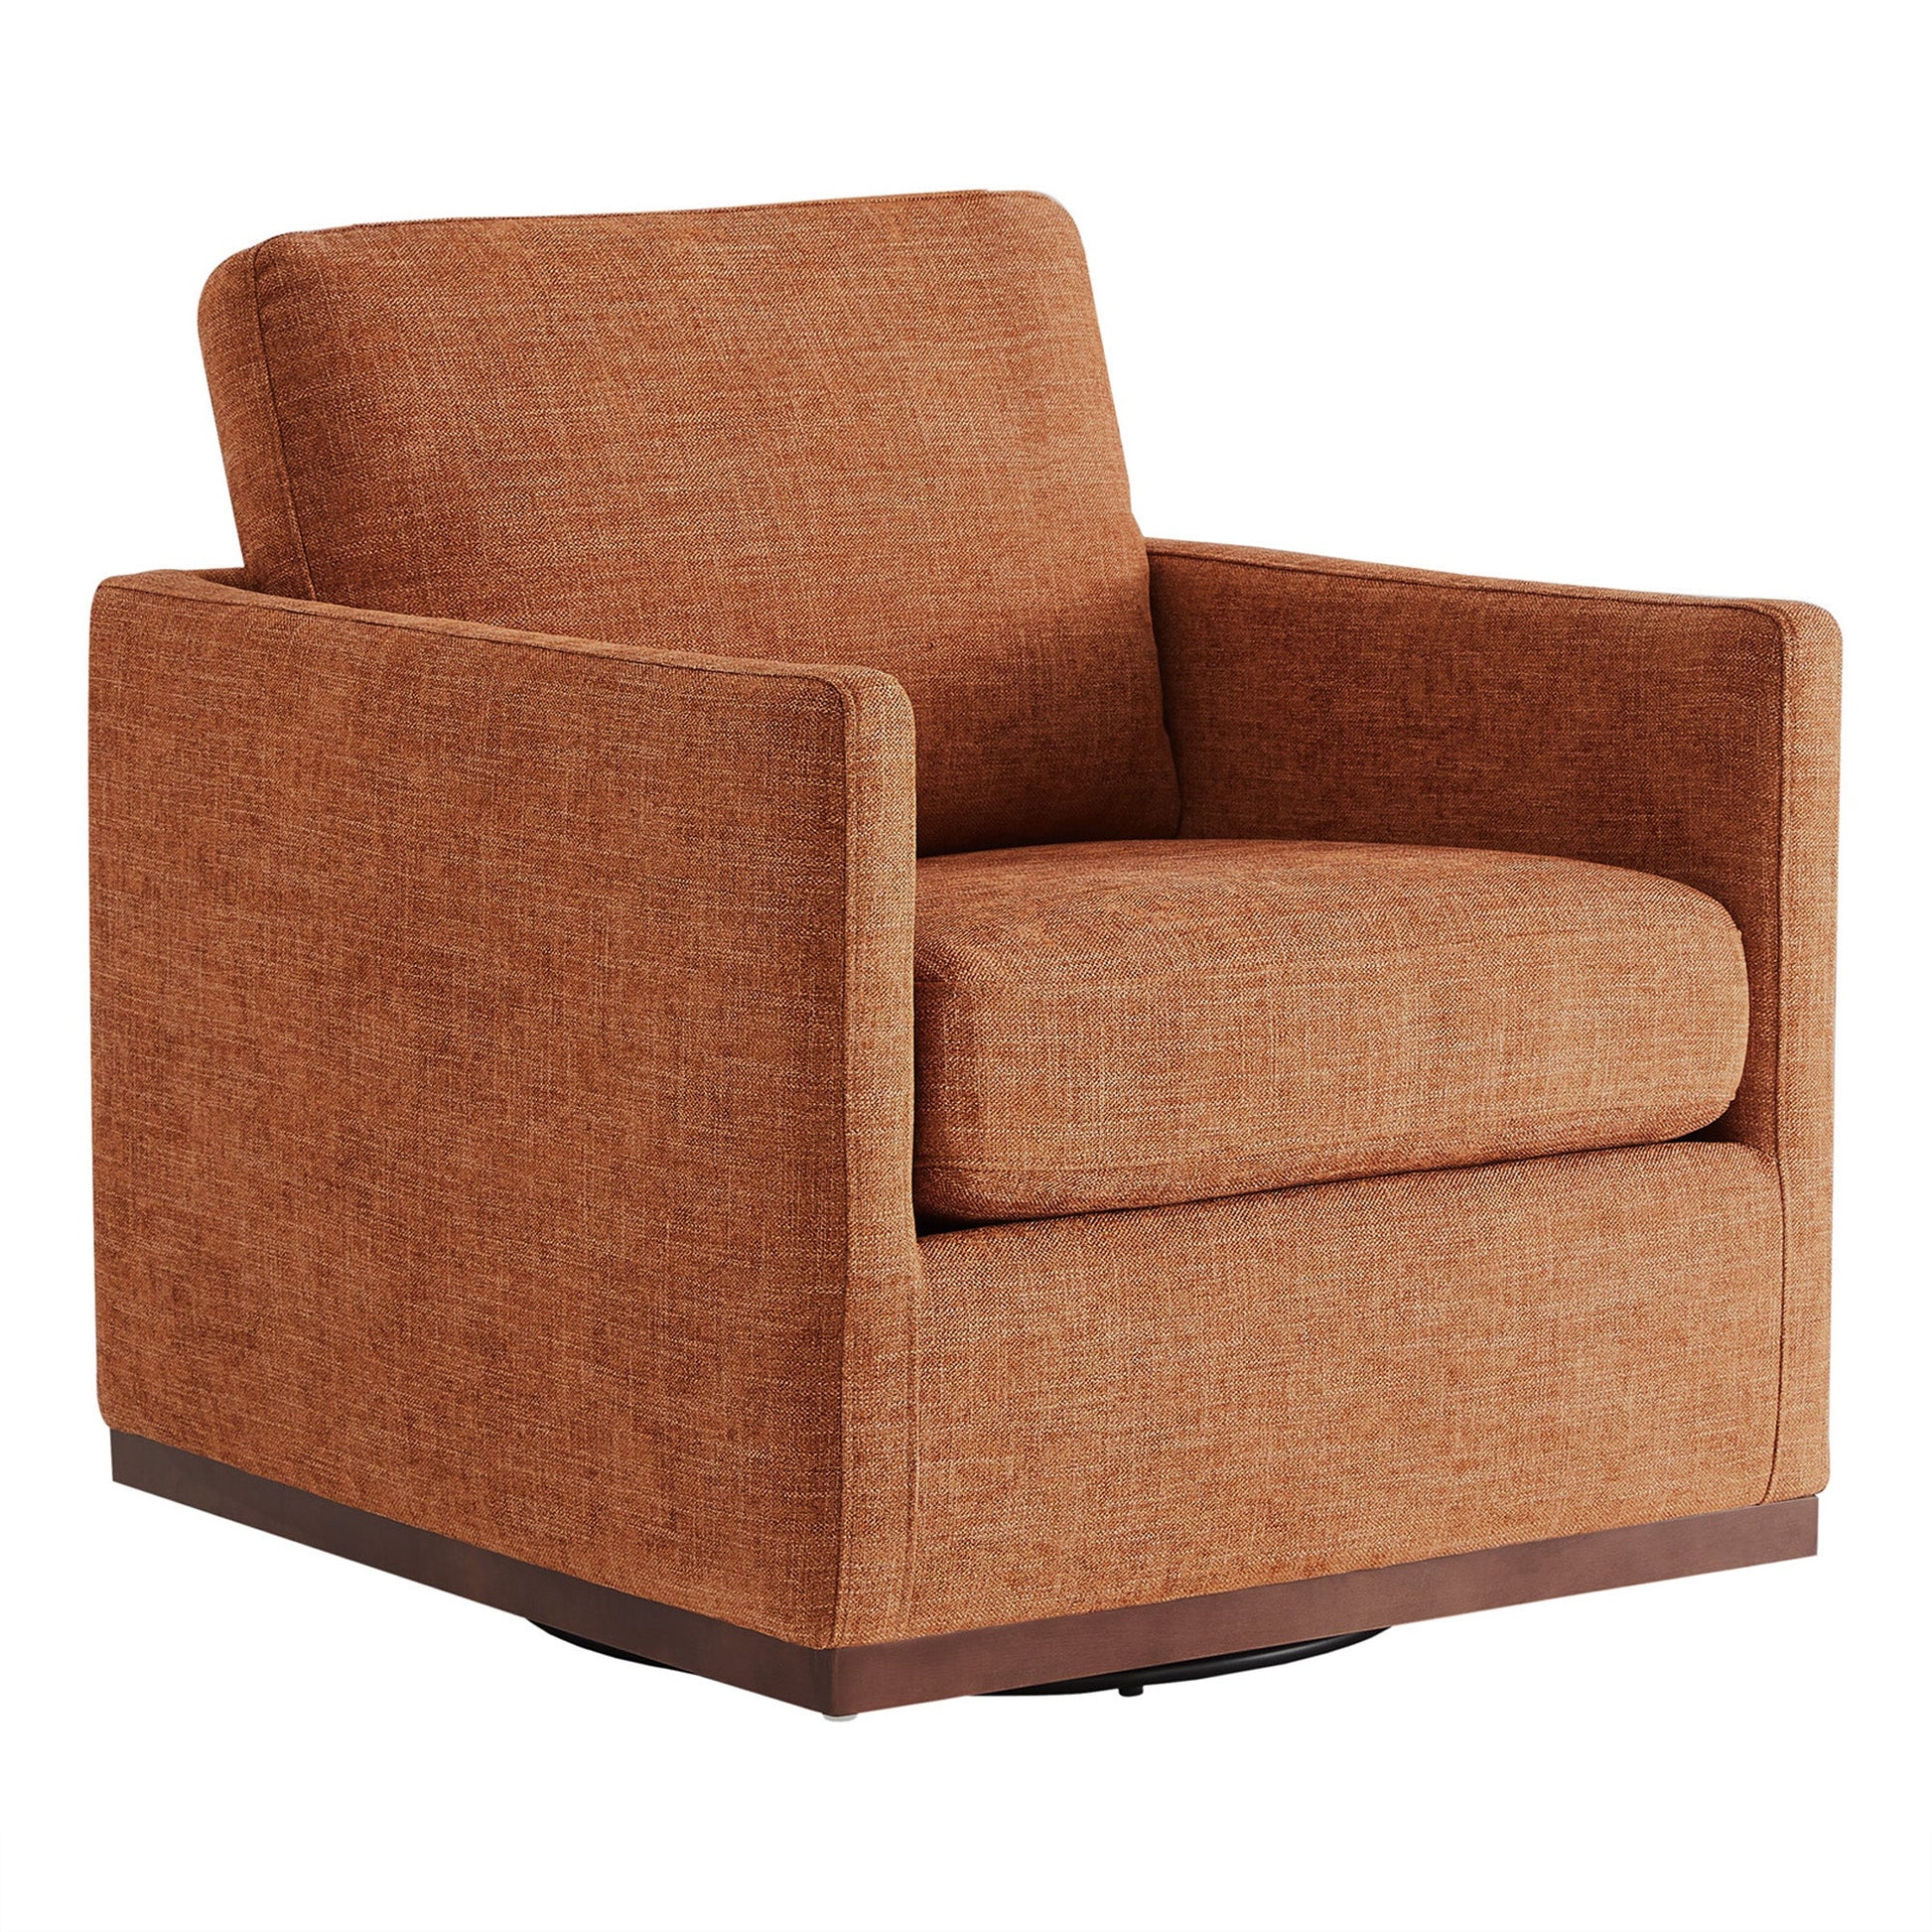 CHITA LIVING-Henry Swivel Accent Chair with Wood Base-Accent Chair-Fabric-Terracotta-